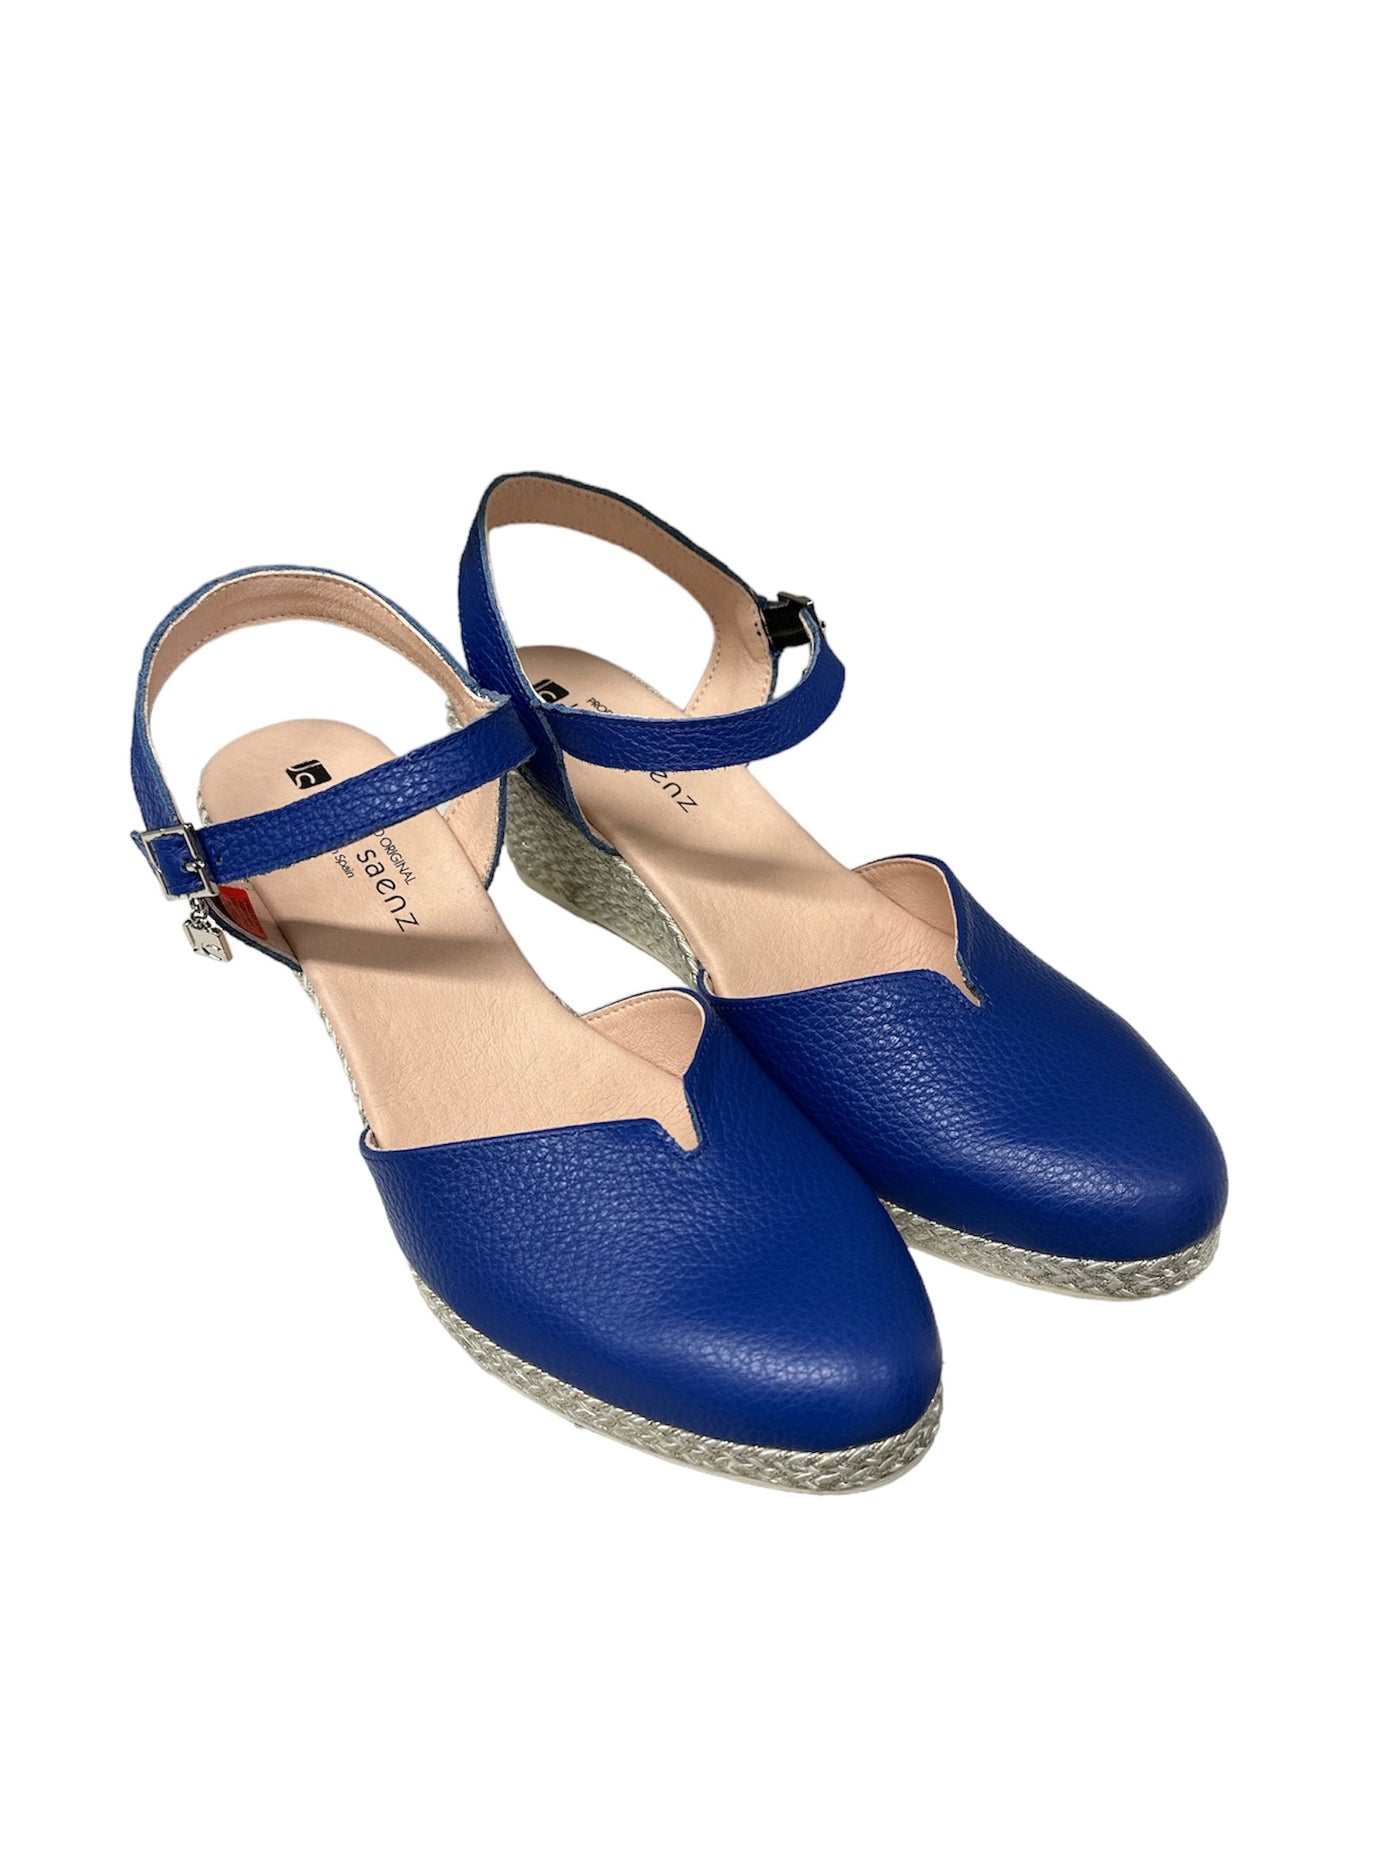 Royal Blue Wedge With Strap